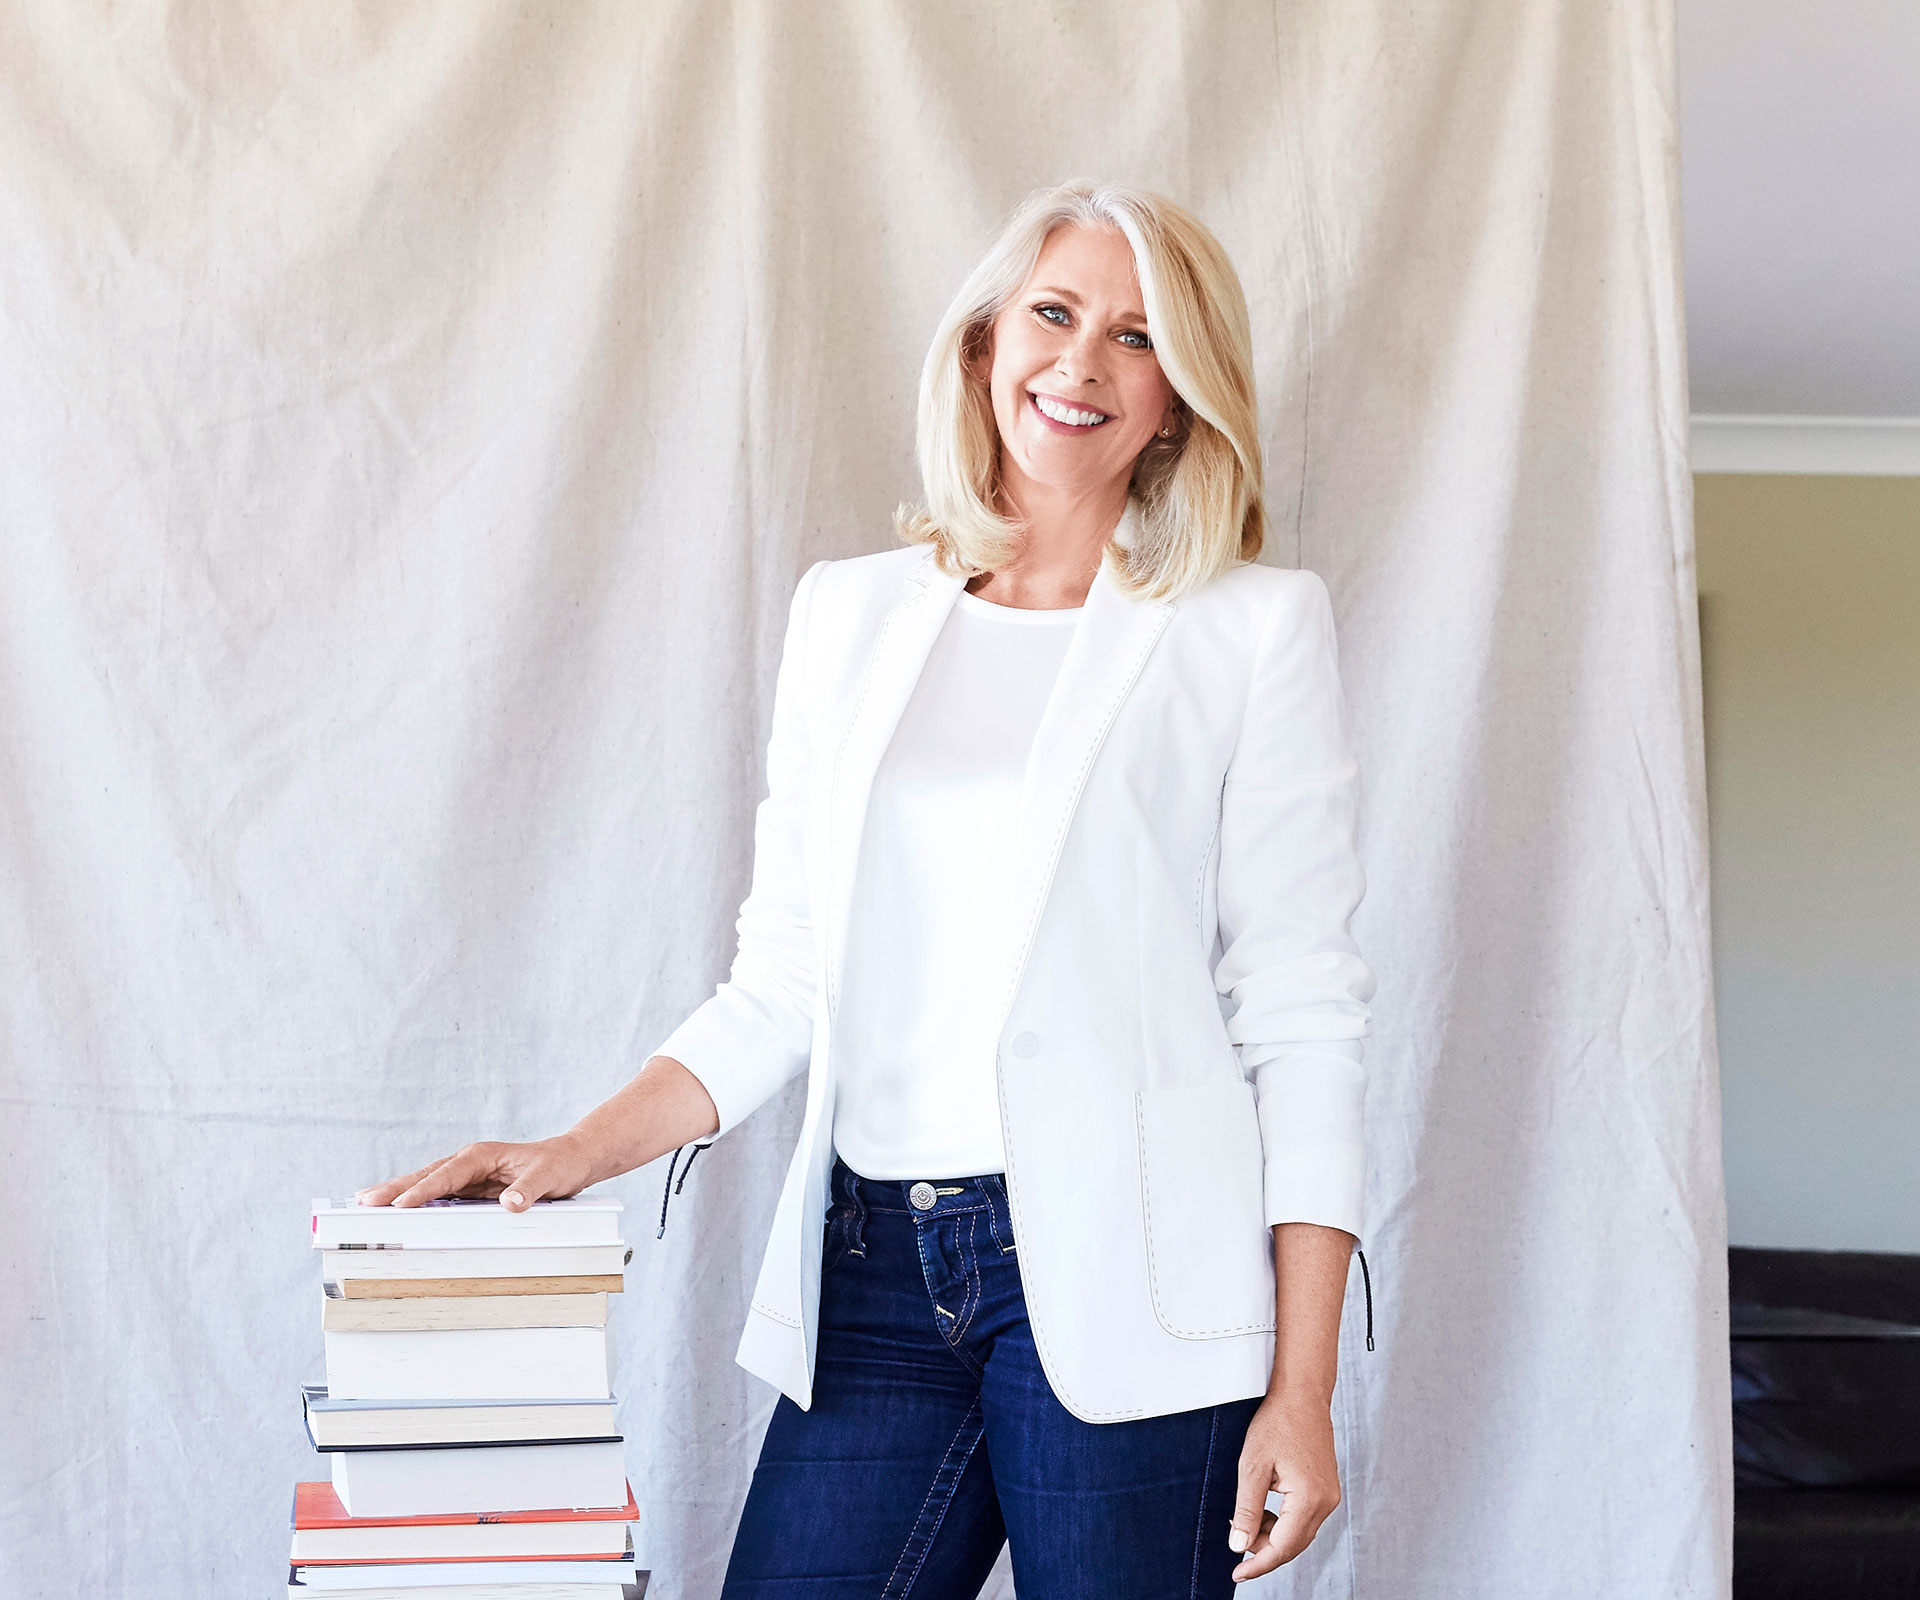 Tracey Spicer reveals she was groped by a colleague at a Christmas party